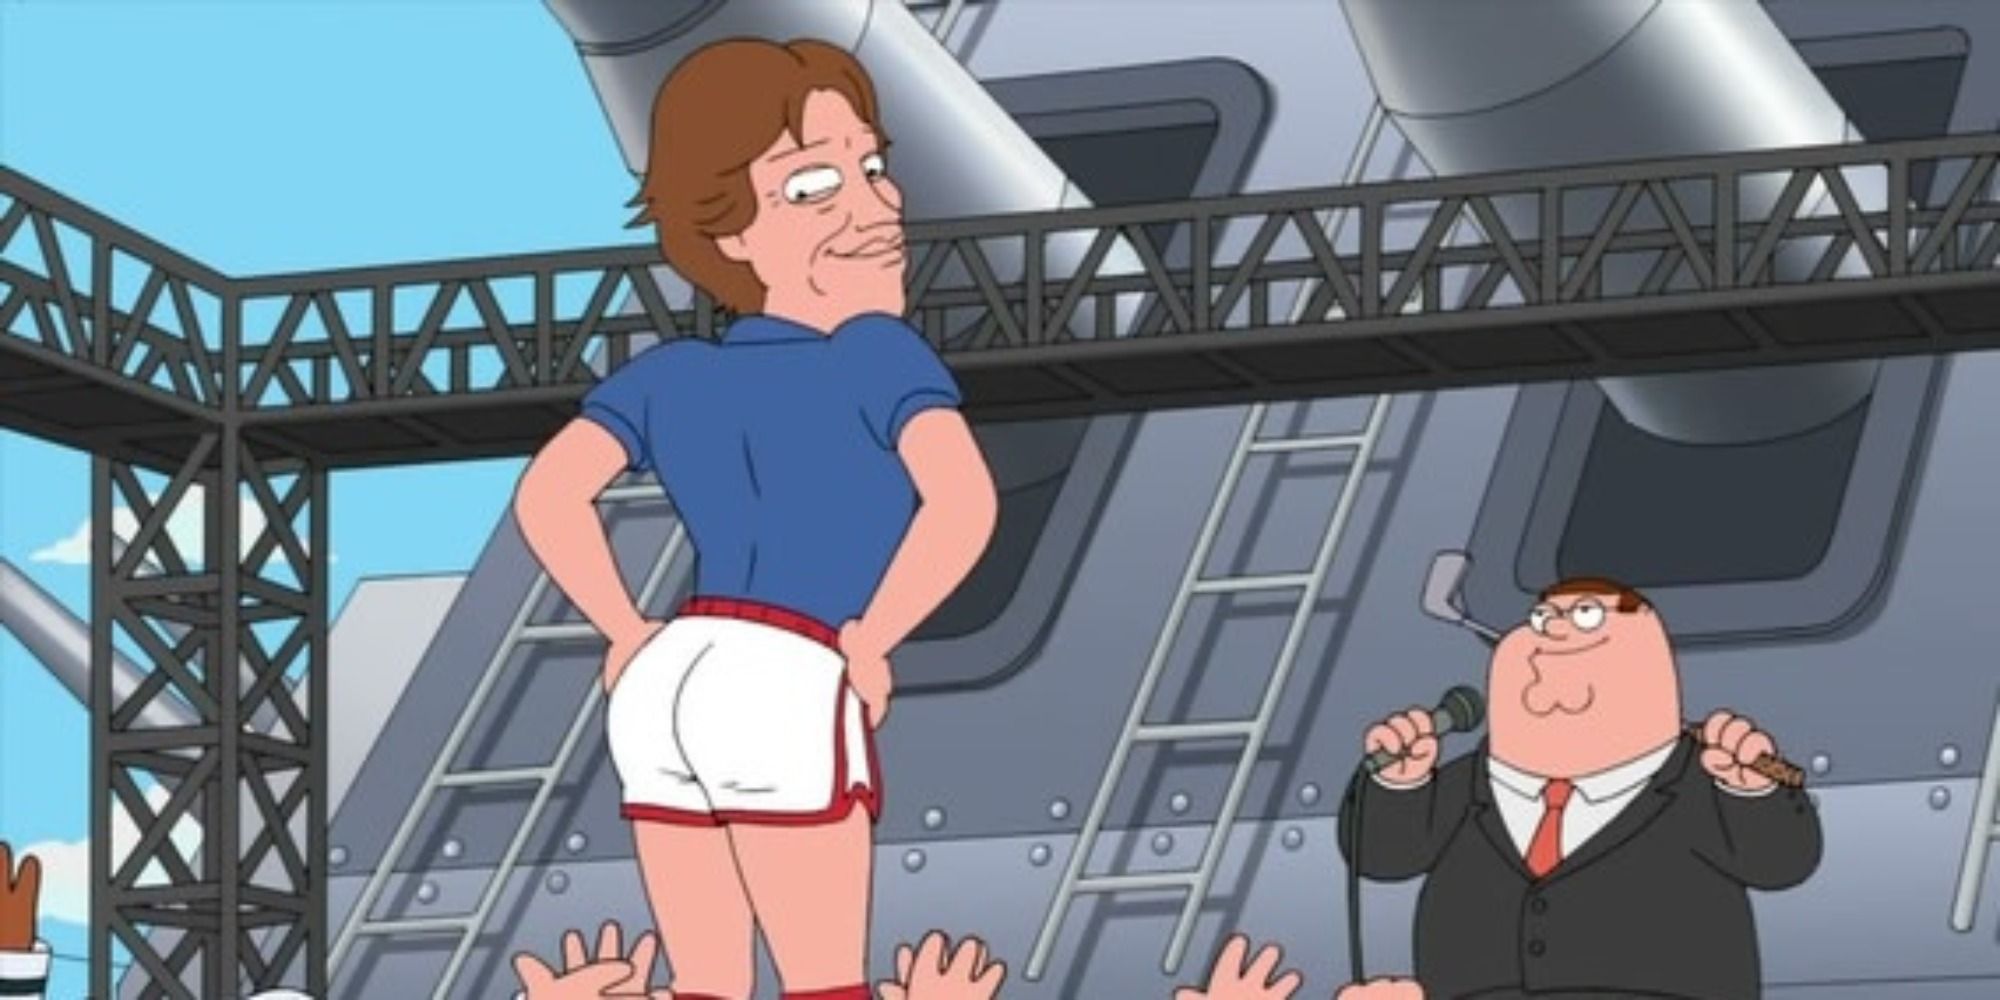 Bruce Jenner dancing with Peter standing in the background